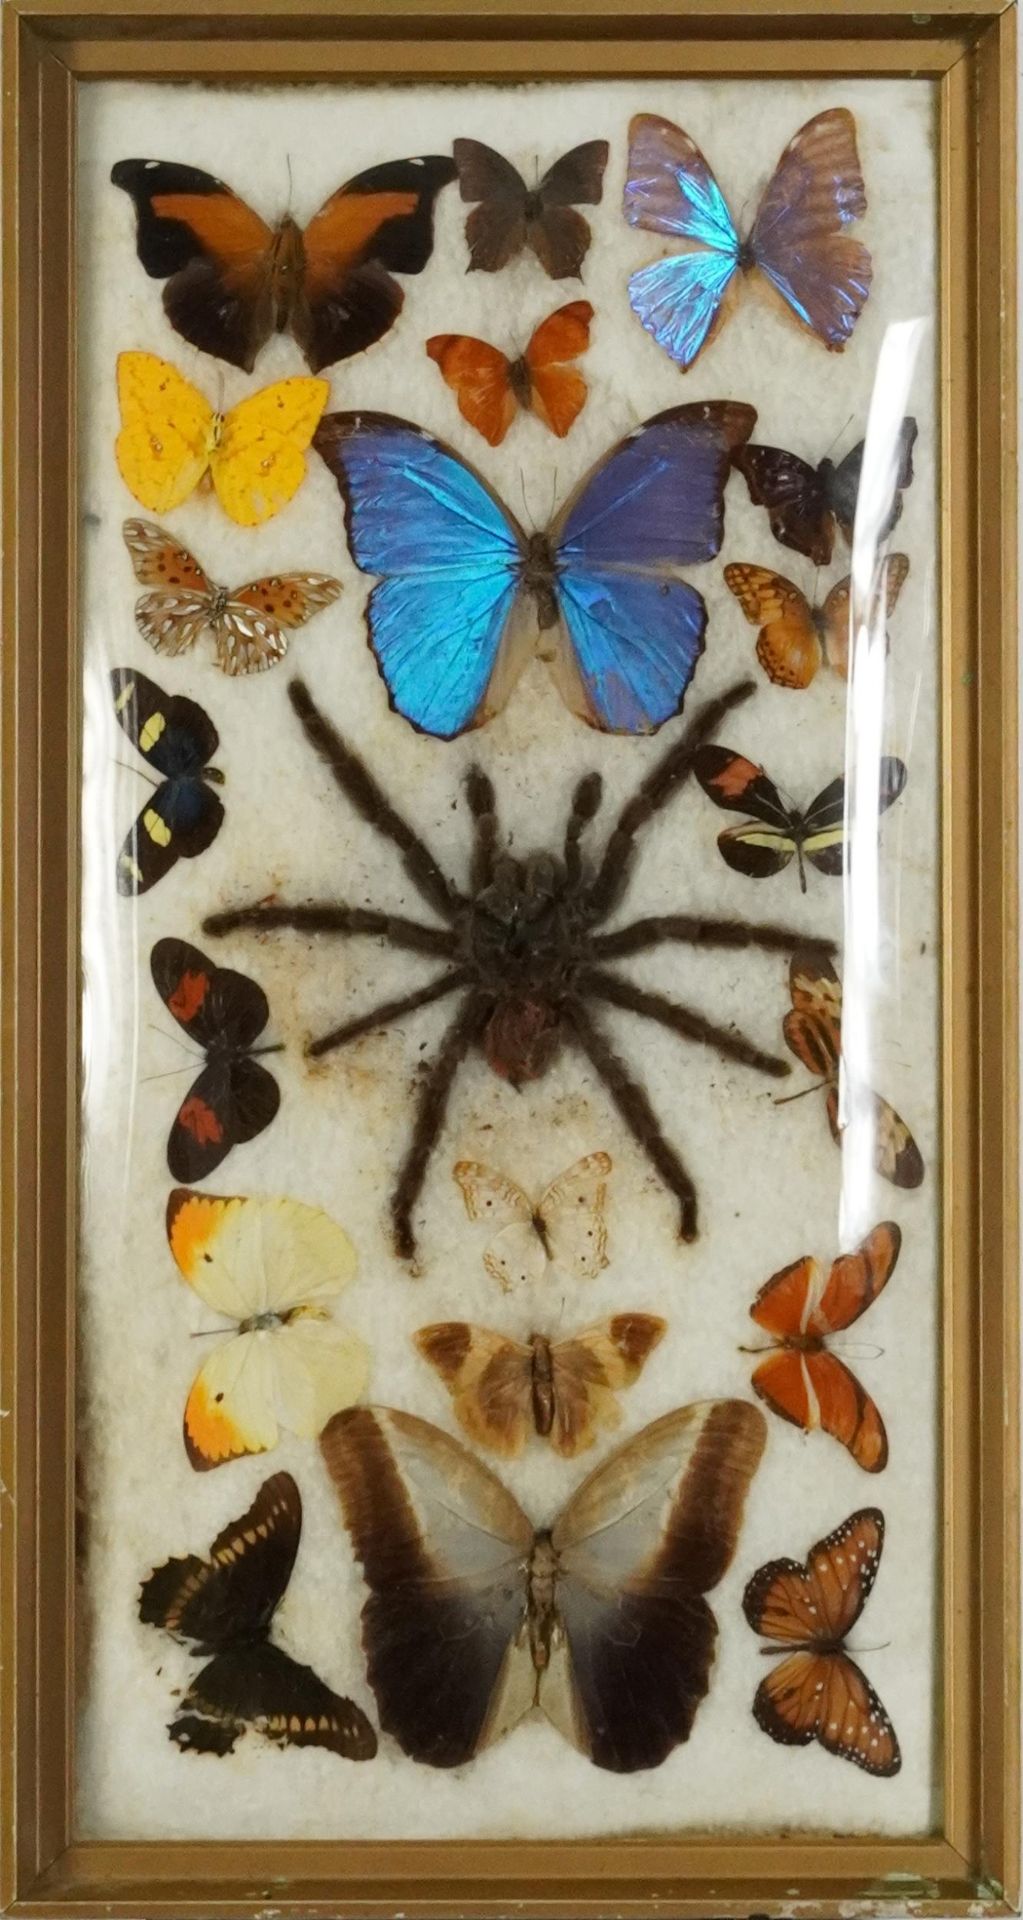 Framed taxidermy display of tarantula and butterflies, overall 53.5cm x 28.5cm : For further - Image 2 of 3